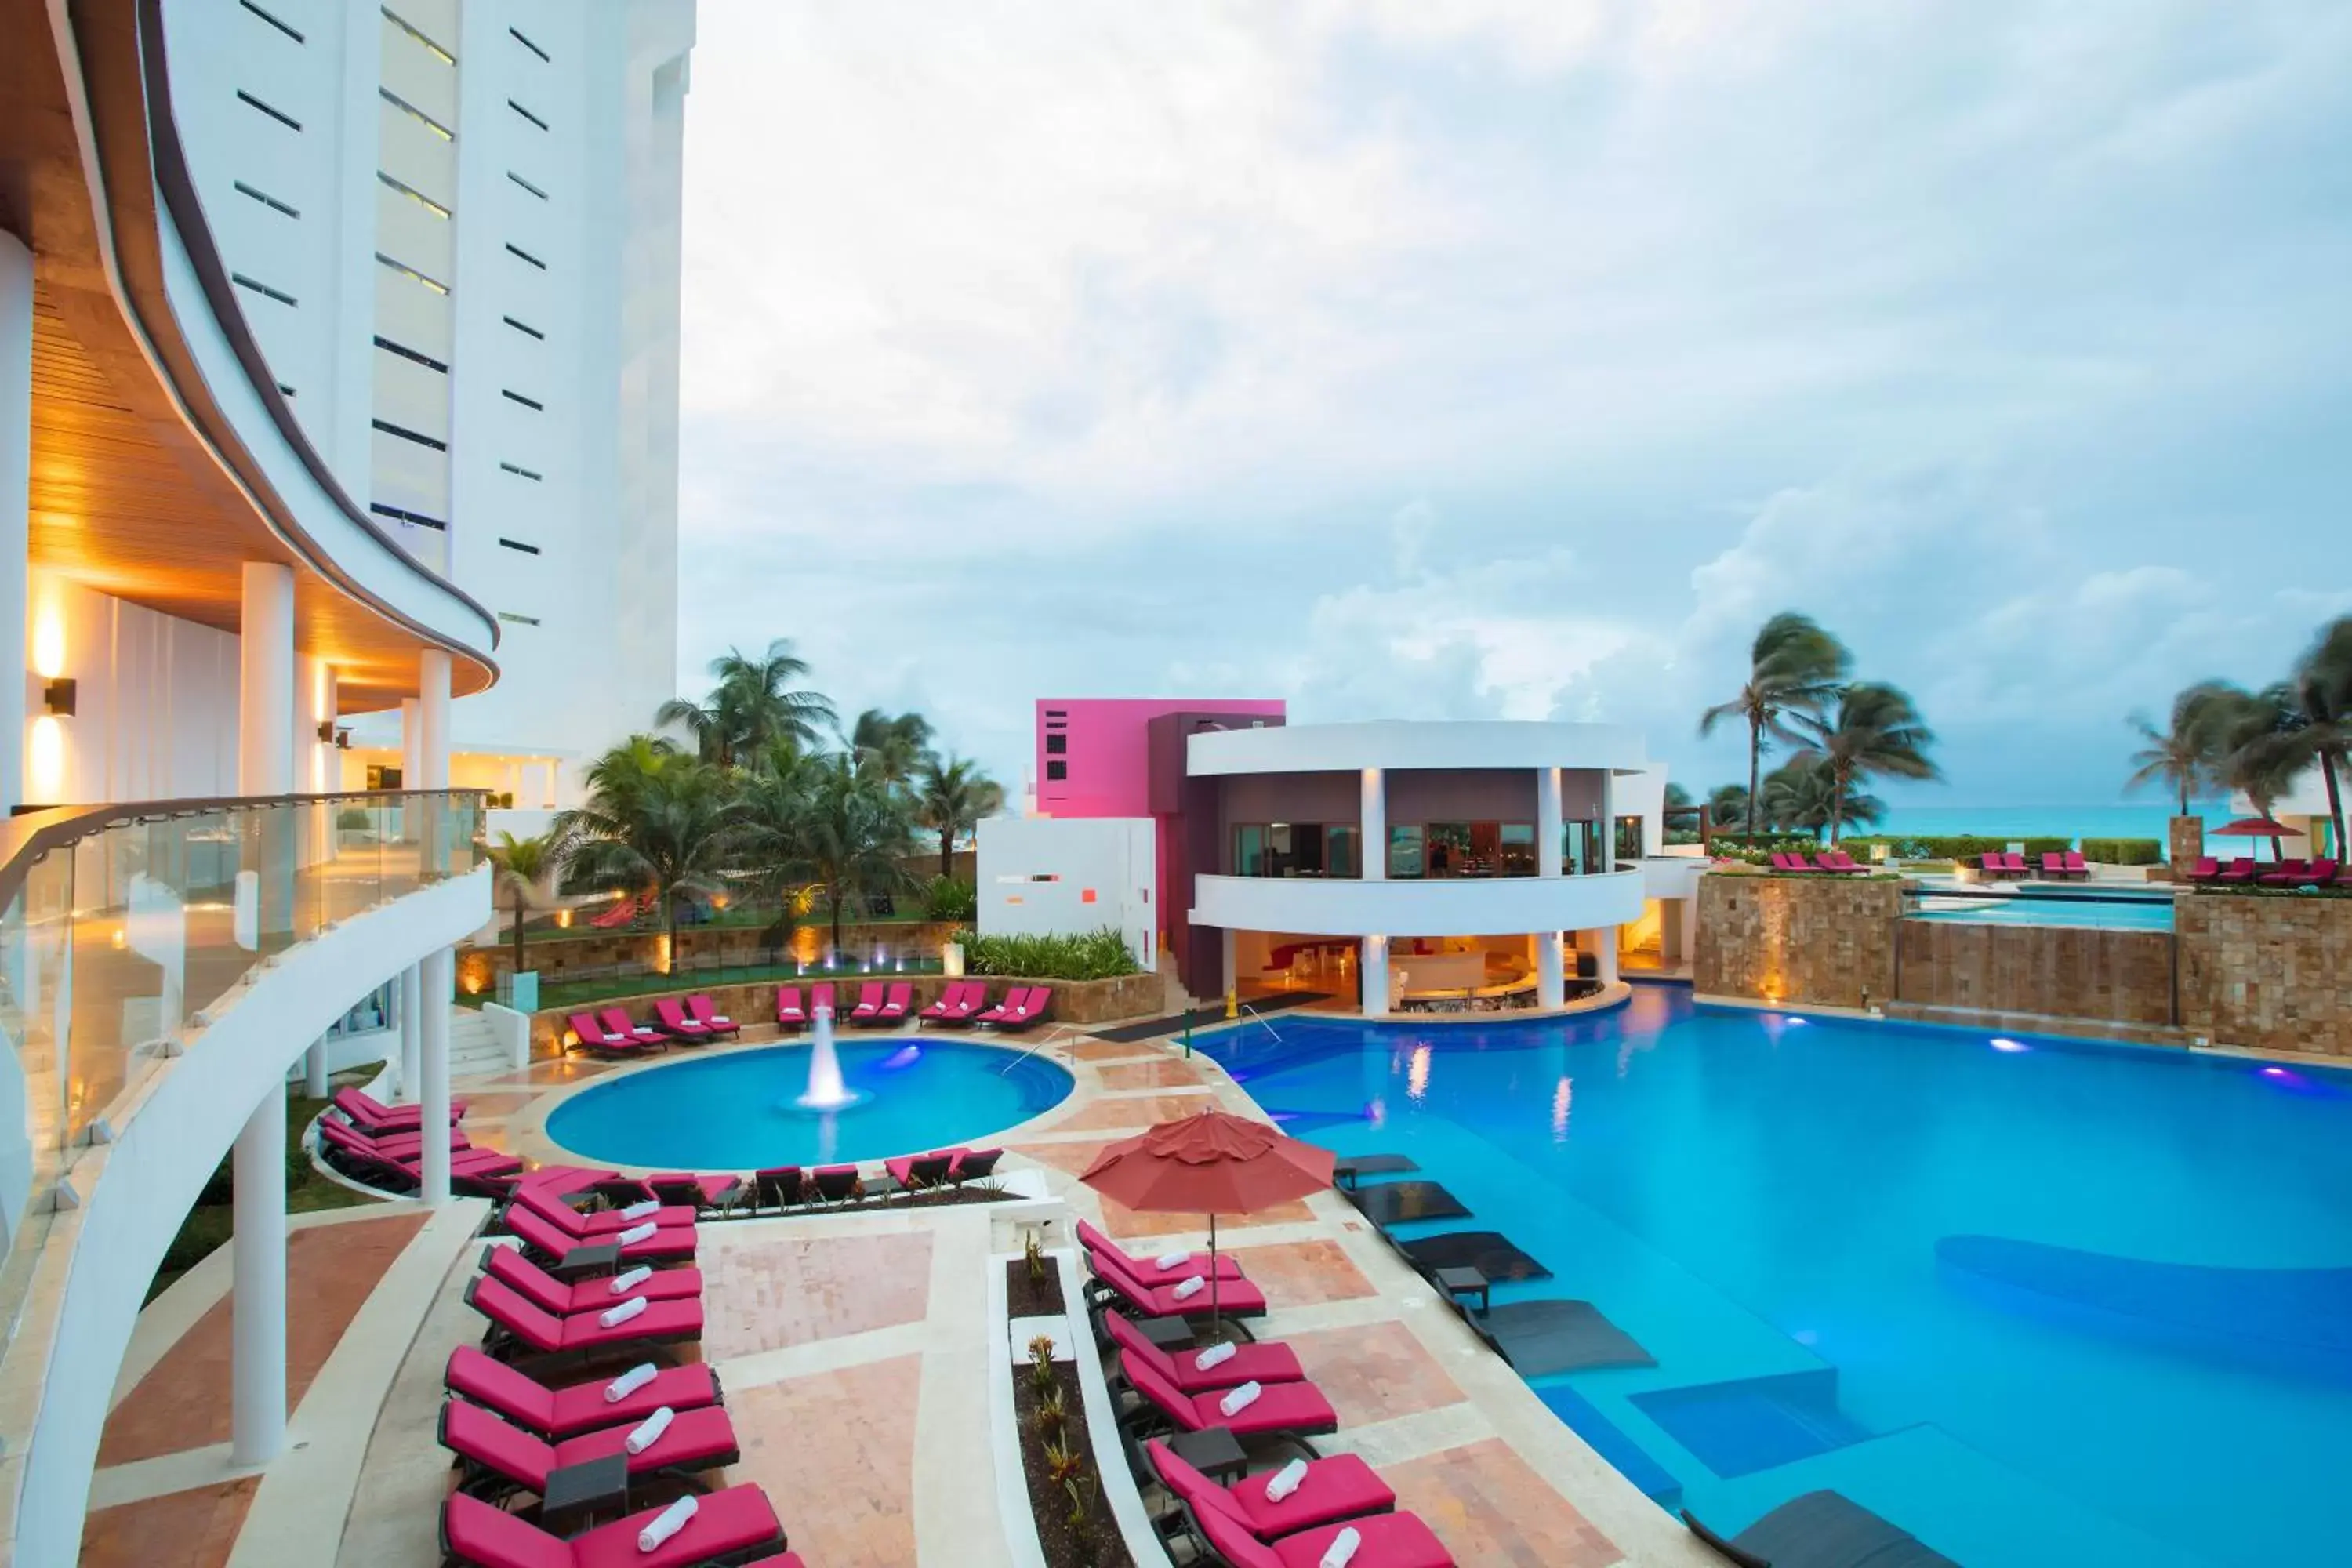 Swimming Pool in Altitude at Krystal Grand Cancun - All Inclusive